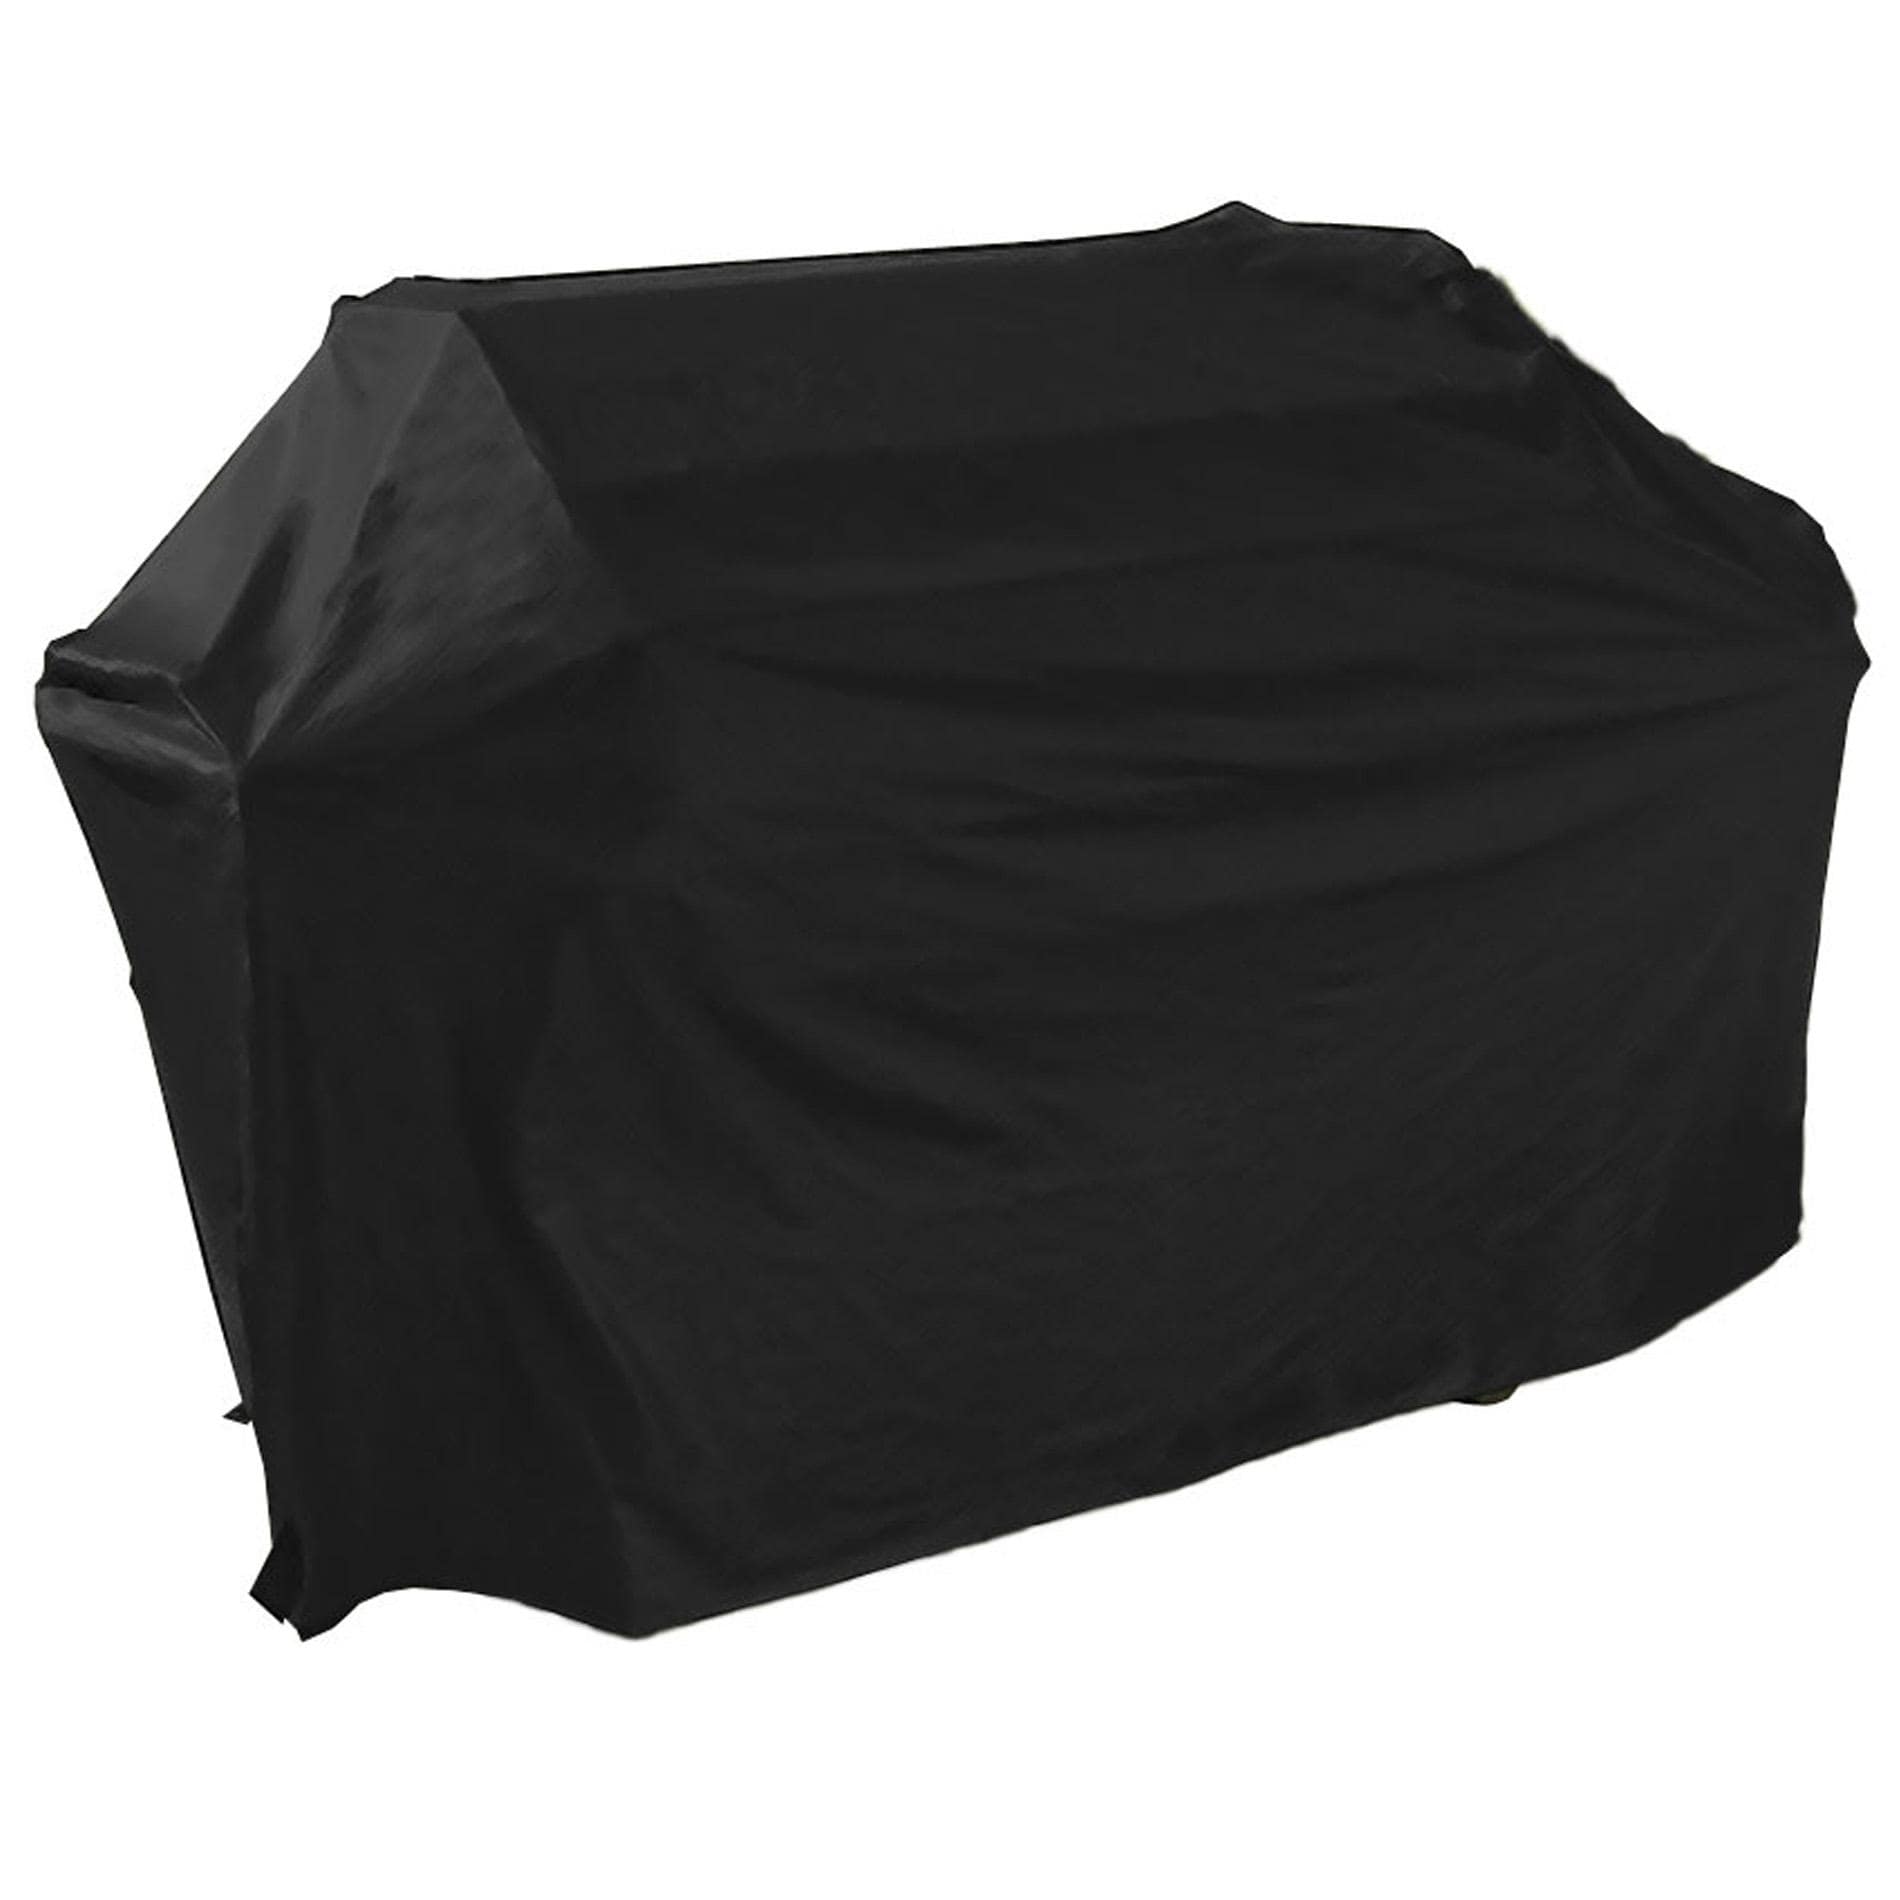 Mr. BBQ Large 75inch Grill Cover Free Shipping On Orders Over 45 13768603